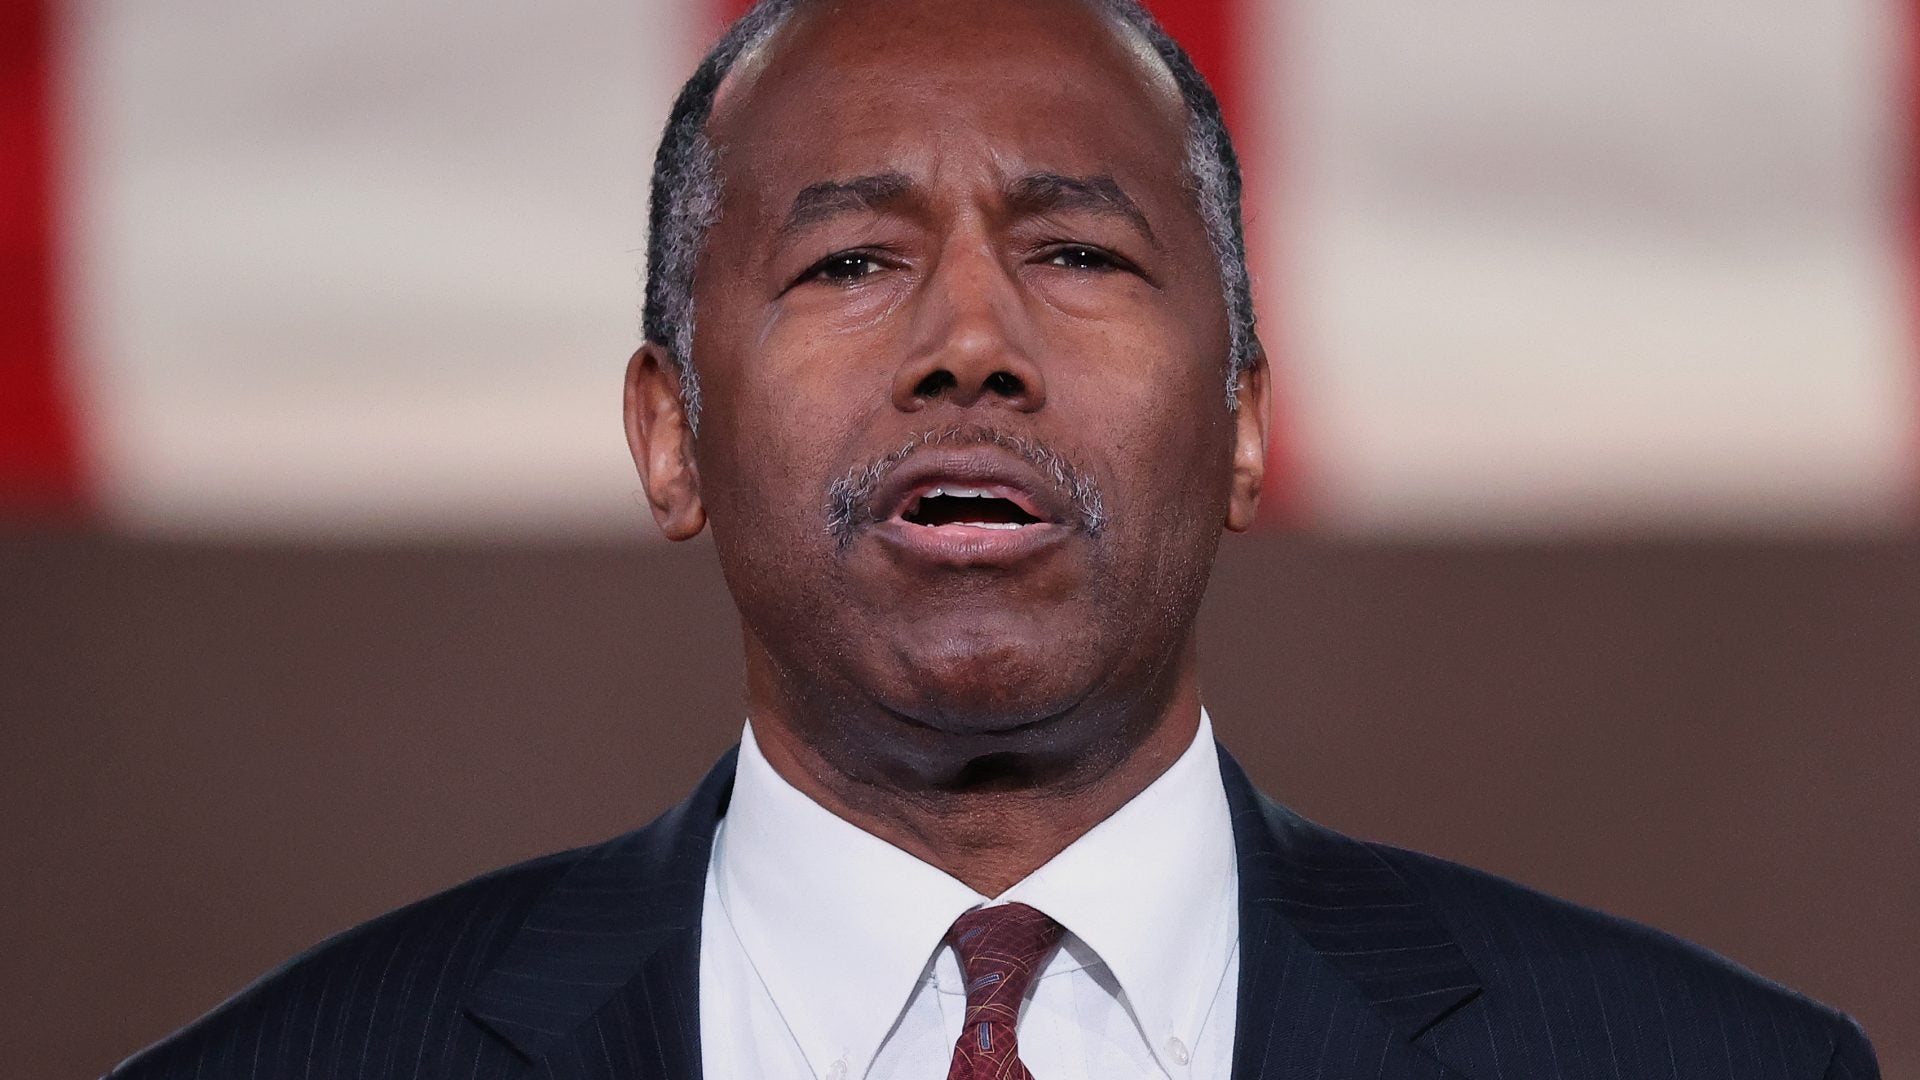 Make it Stop: Dr. Ben Carson Compares Himself to a 'Runaway Slave'